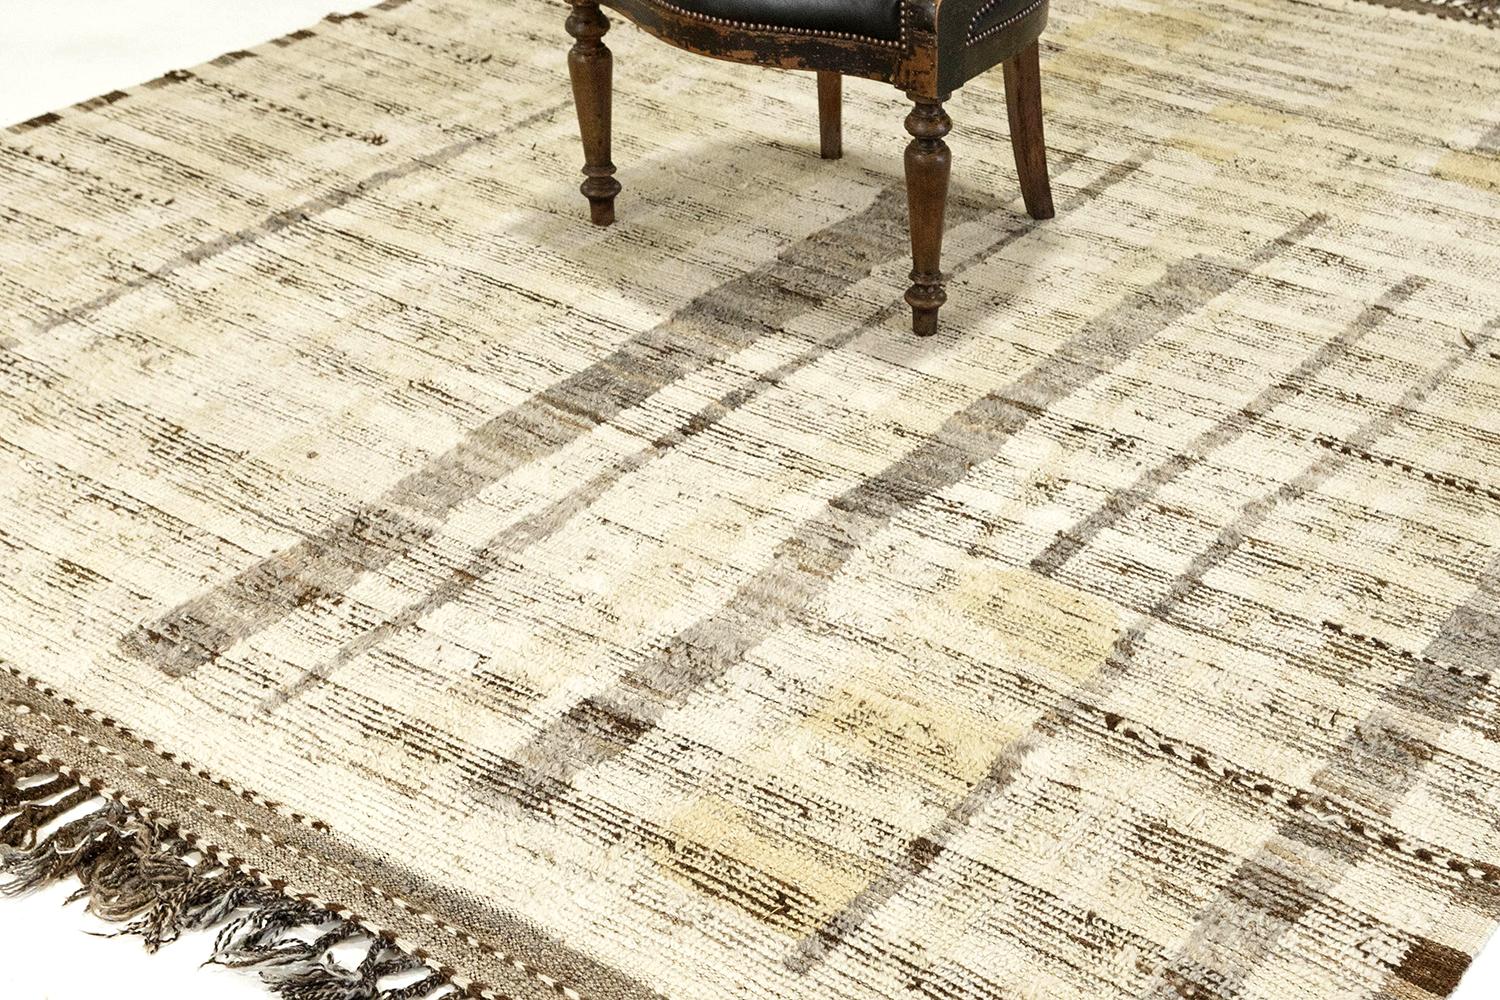 'Talassemtane' is a beautifully textured rug with irregular motifs inspired from the Atlas Mountains of Morocco. Natural brown and gray colors surrounded by the perfect ivory shag work cohesively to make for a great contemporary interpretation for